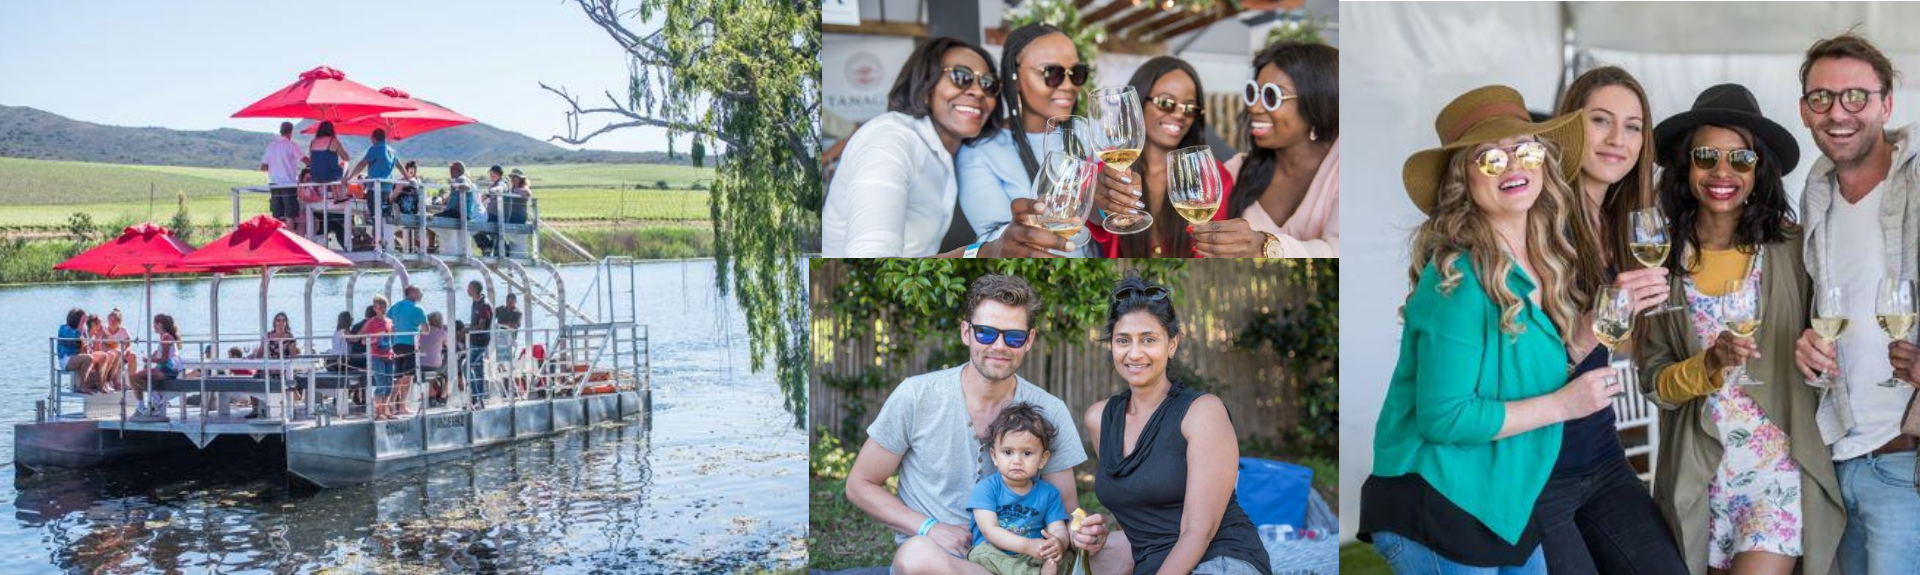 Wine on the River 2019 - Robertson